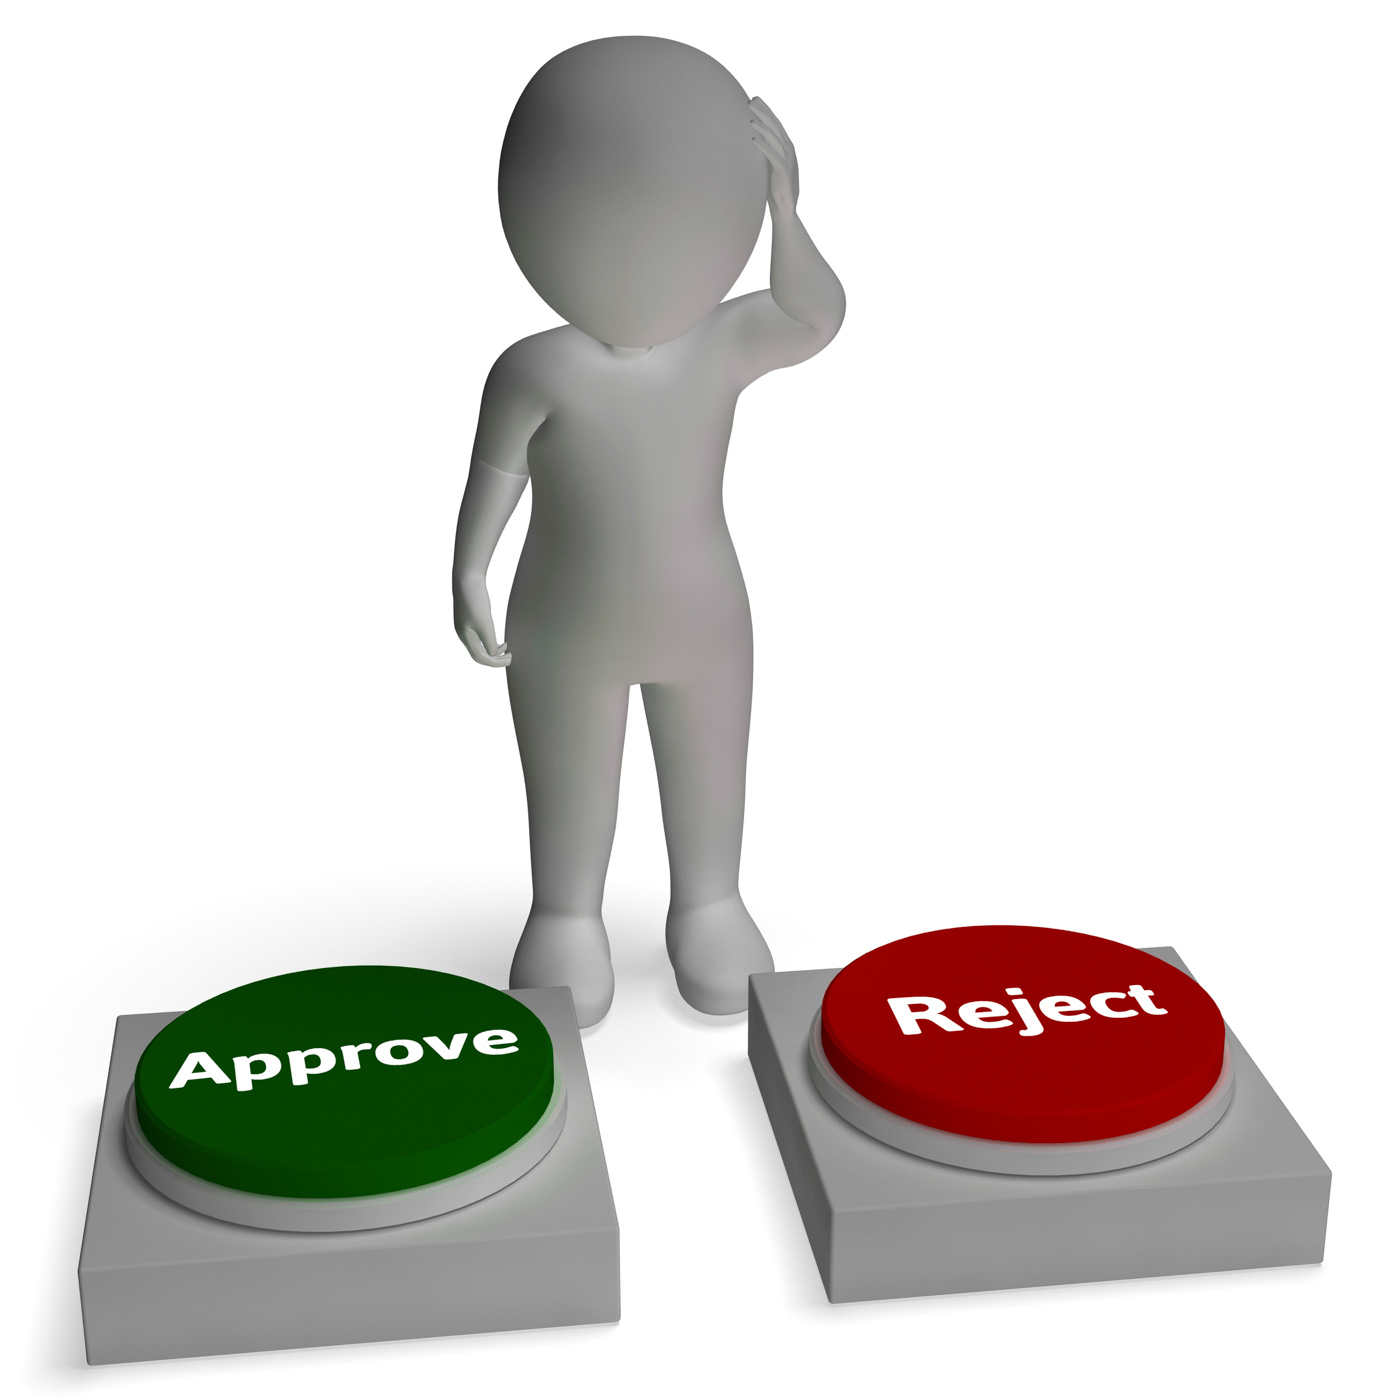 Approve Reject Buttons Shows Approval Or Rejection, Accept, Granted, Verified, Validation, HQ Photo